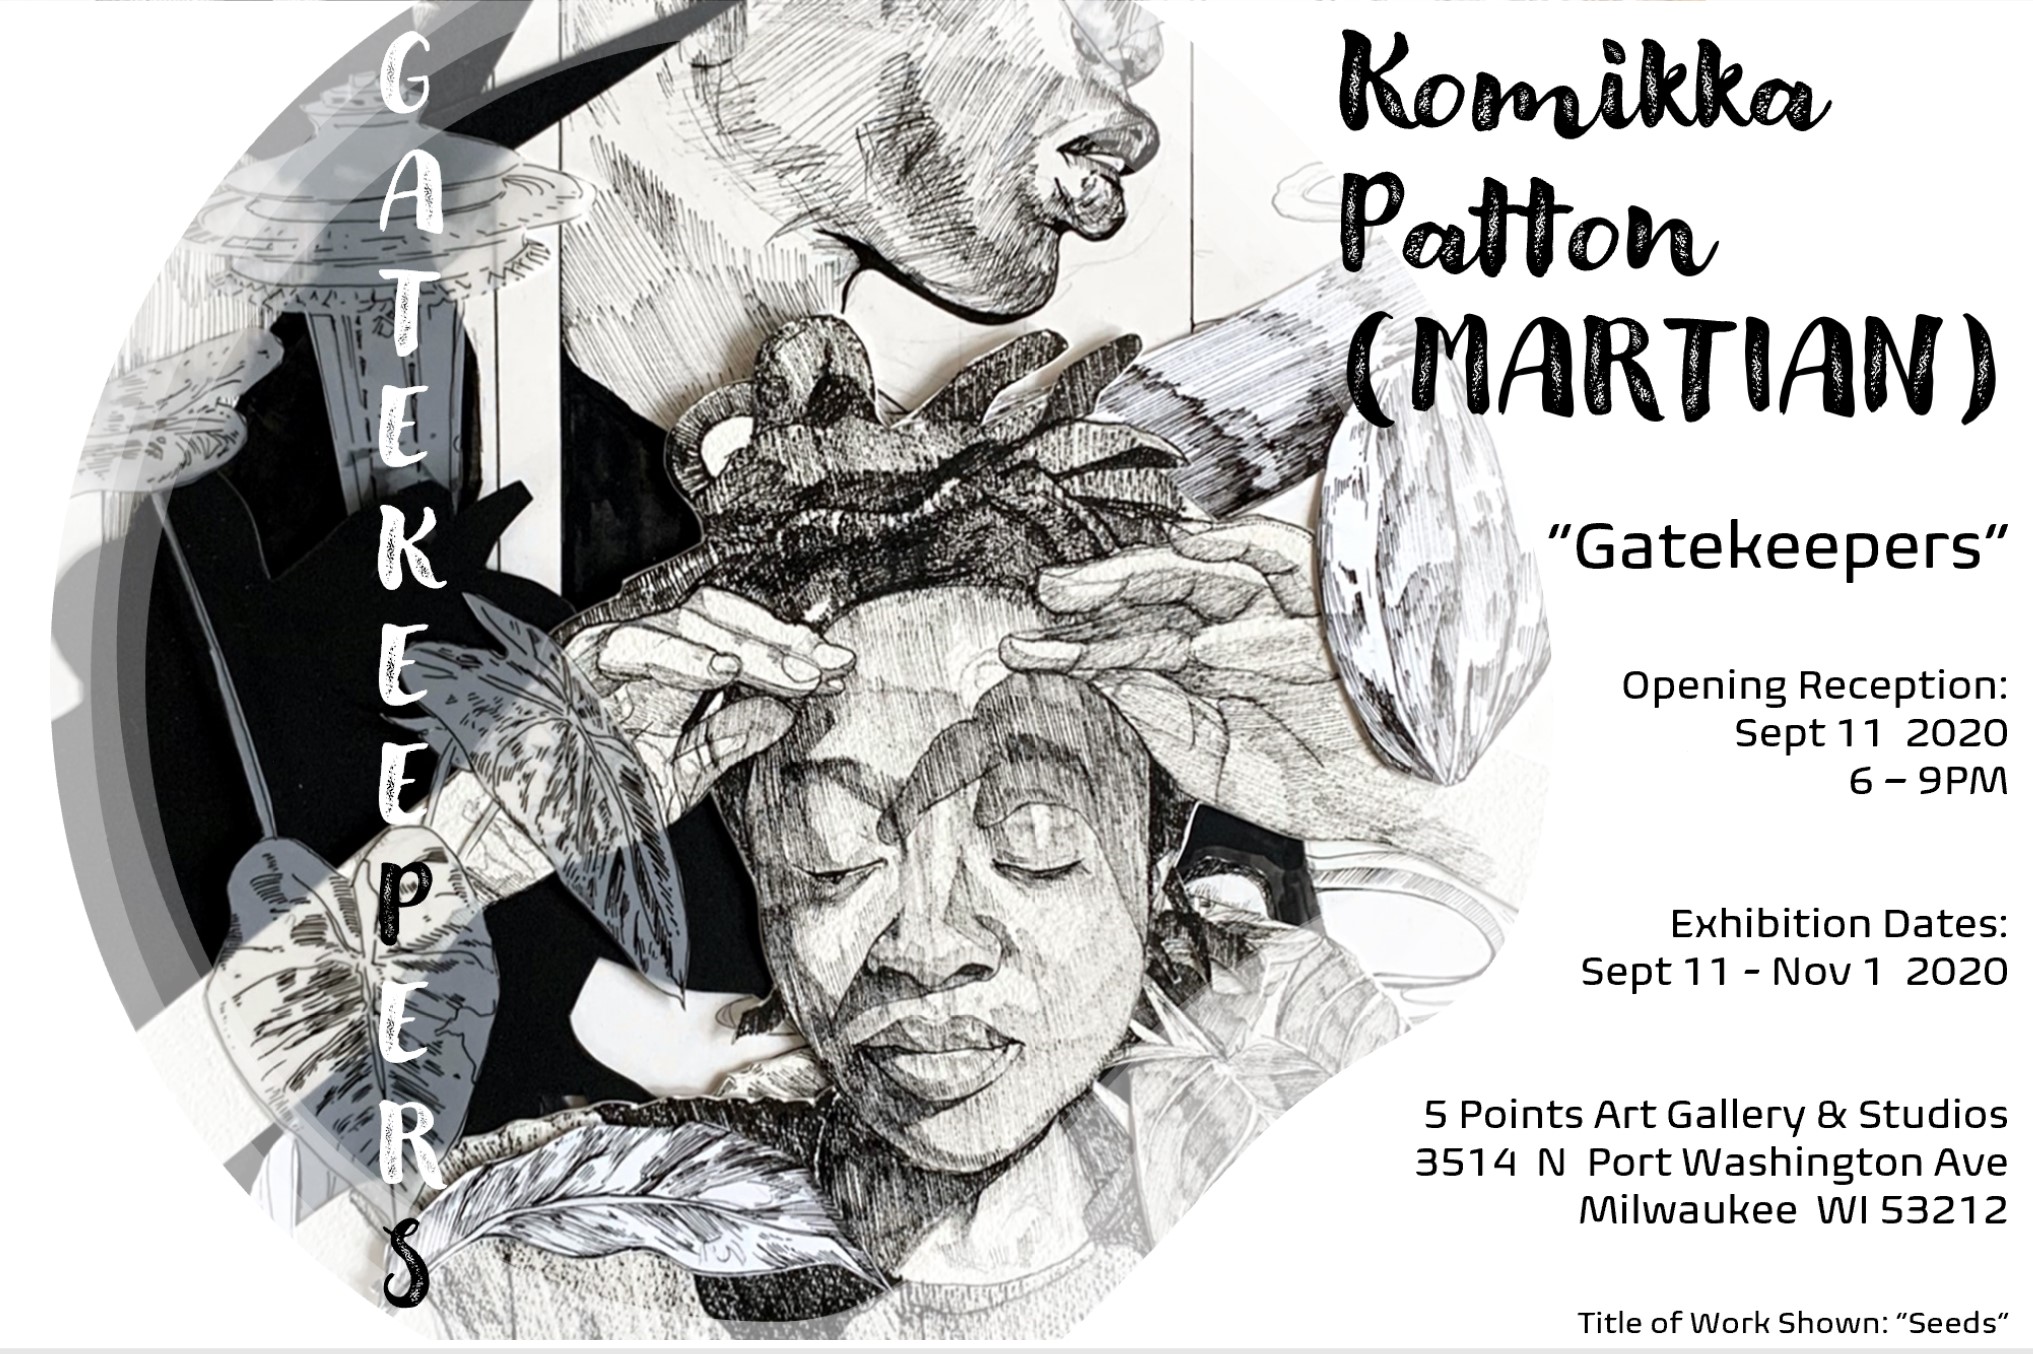 5 Points Art Gallery & Studios “Gatekeepers” Solo Exhibition